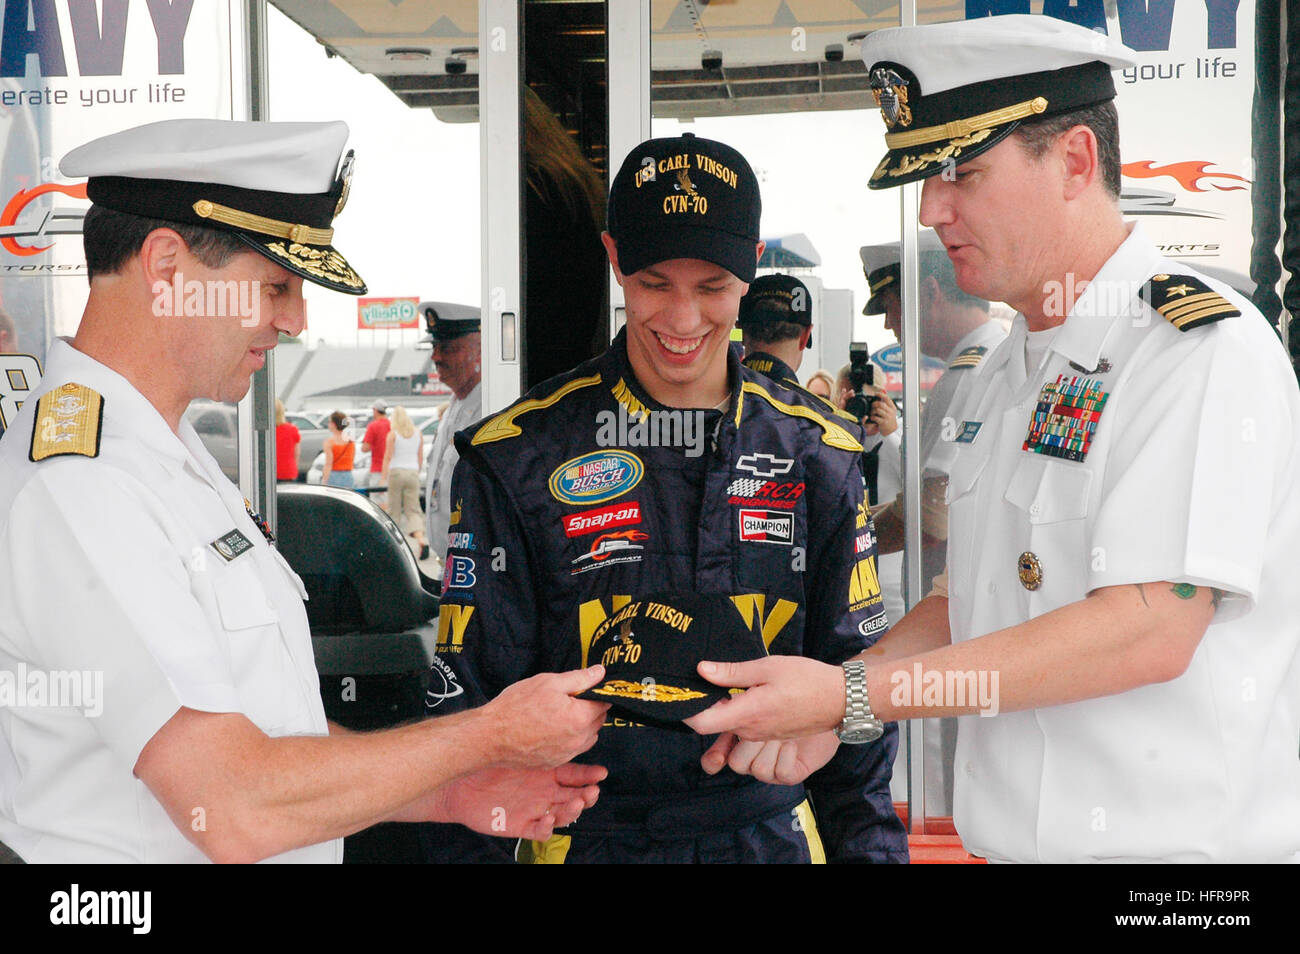 070728-N-5362H-052 INDIANAPOLIS (July 28, 2007) Ð Rear Adm. Bruce Clingan receives a command ball cap from Cmdr. John Harber, intel officer aboard USS Carl Vinson (CVN 70) during a meet and greet with Navy NASCAR team driver Brad Keselowski before the Kroger 200 Bush series race at the O'Reilly Raceway Park in Indianapolis. Clingan and seven Sailors from Carl Vinson attended the race as the Fleet Honorary, to cheer on the number 88 Navy Chevy Monte Carlo. U.S. Navy photo by Mass Communication Specialist Seaman Nina Hughes (RELEASED) US Navy 070728-N-5362H-052 Rear Adm. Bruce Clingan receives a Stock Photo